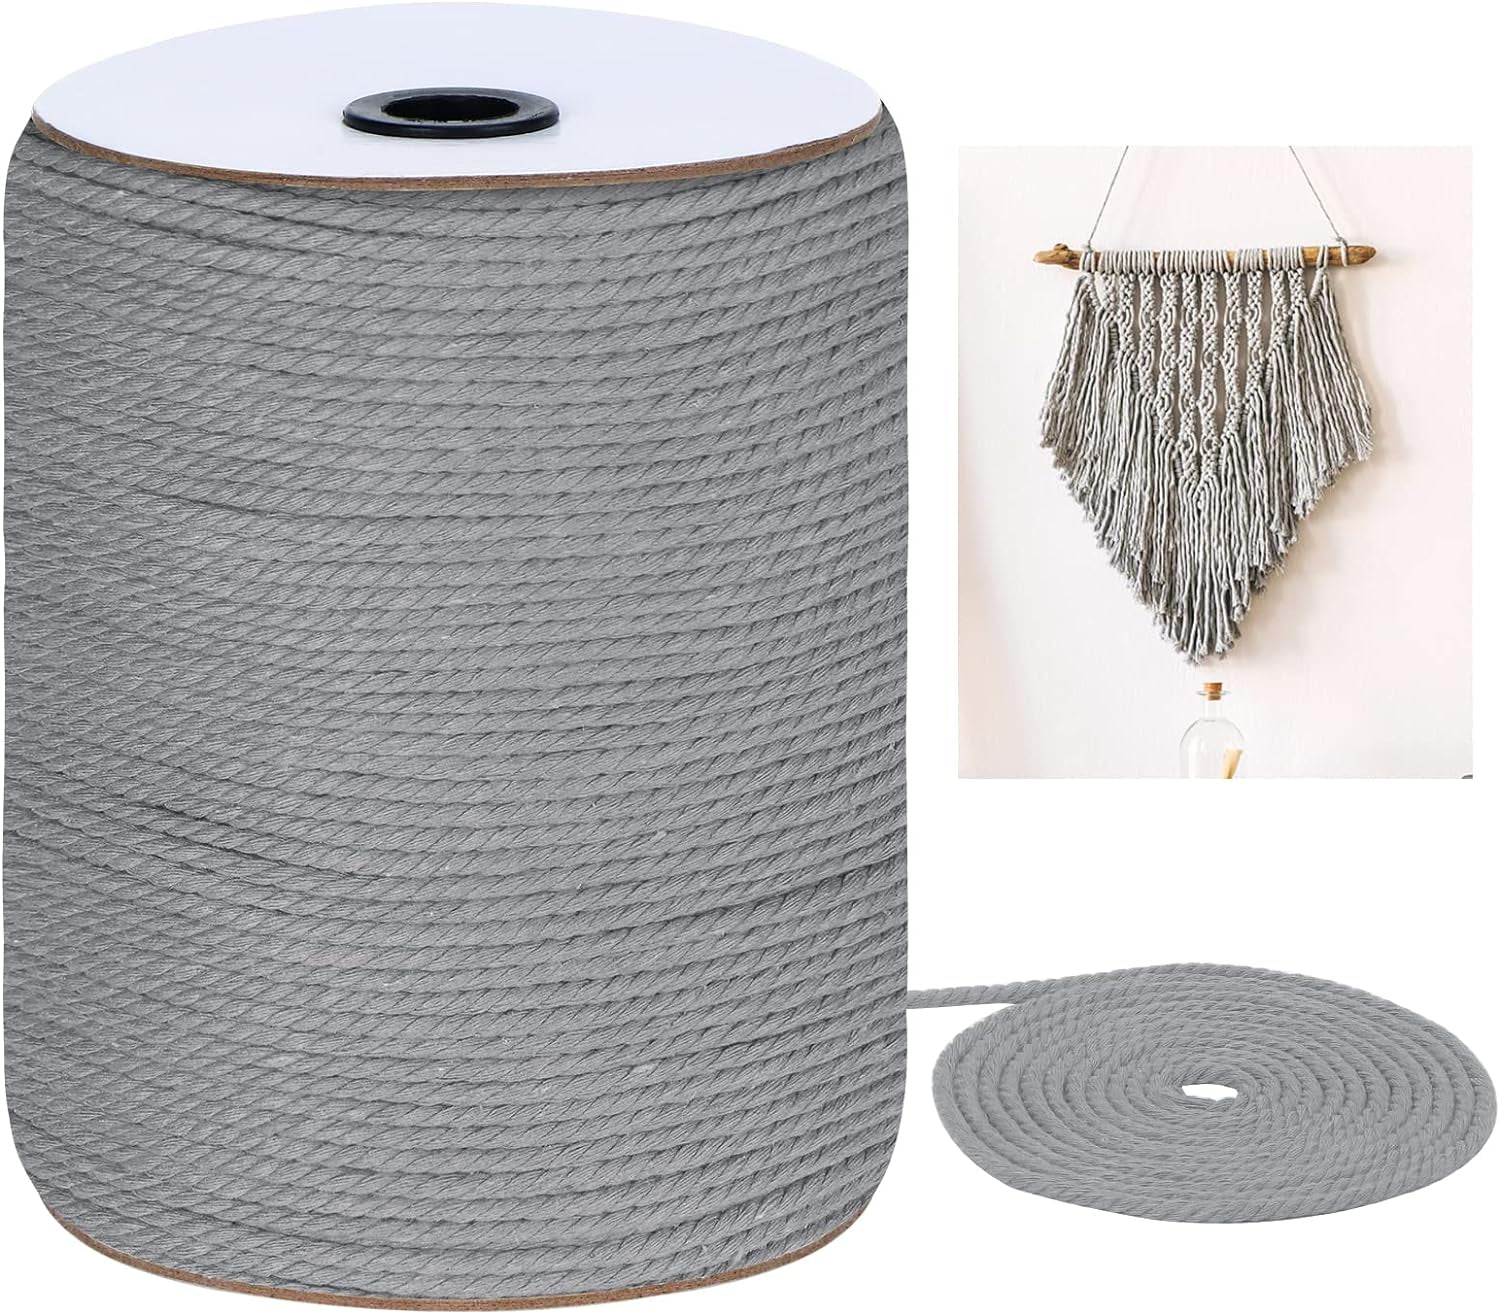 Macrame Cord 4Mm X 328Yards(984Feet),Natural Cotton Macrame Rope - 3 Strands Twisted Macrame Cotton Cord for Wall Hanging, Plant Hangers, Crafts, Gift Wrapping and Wedding Decorations